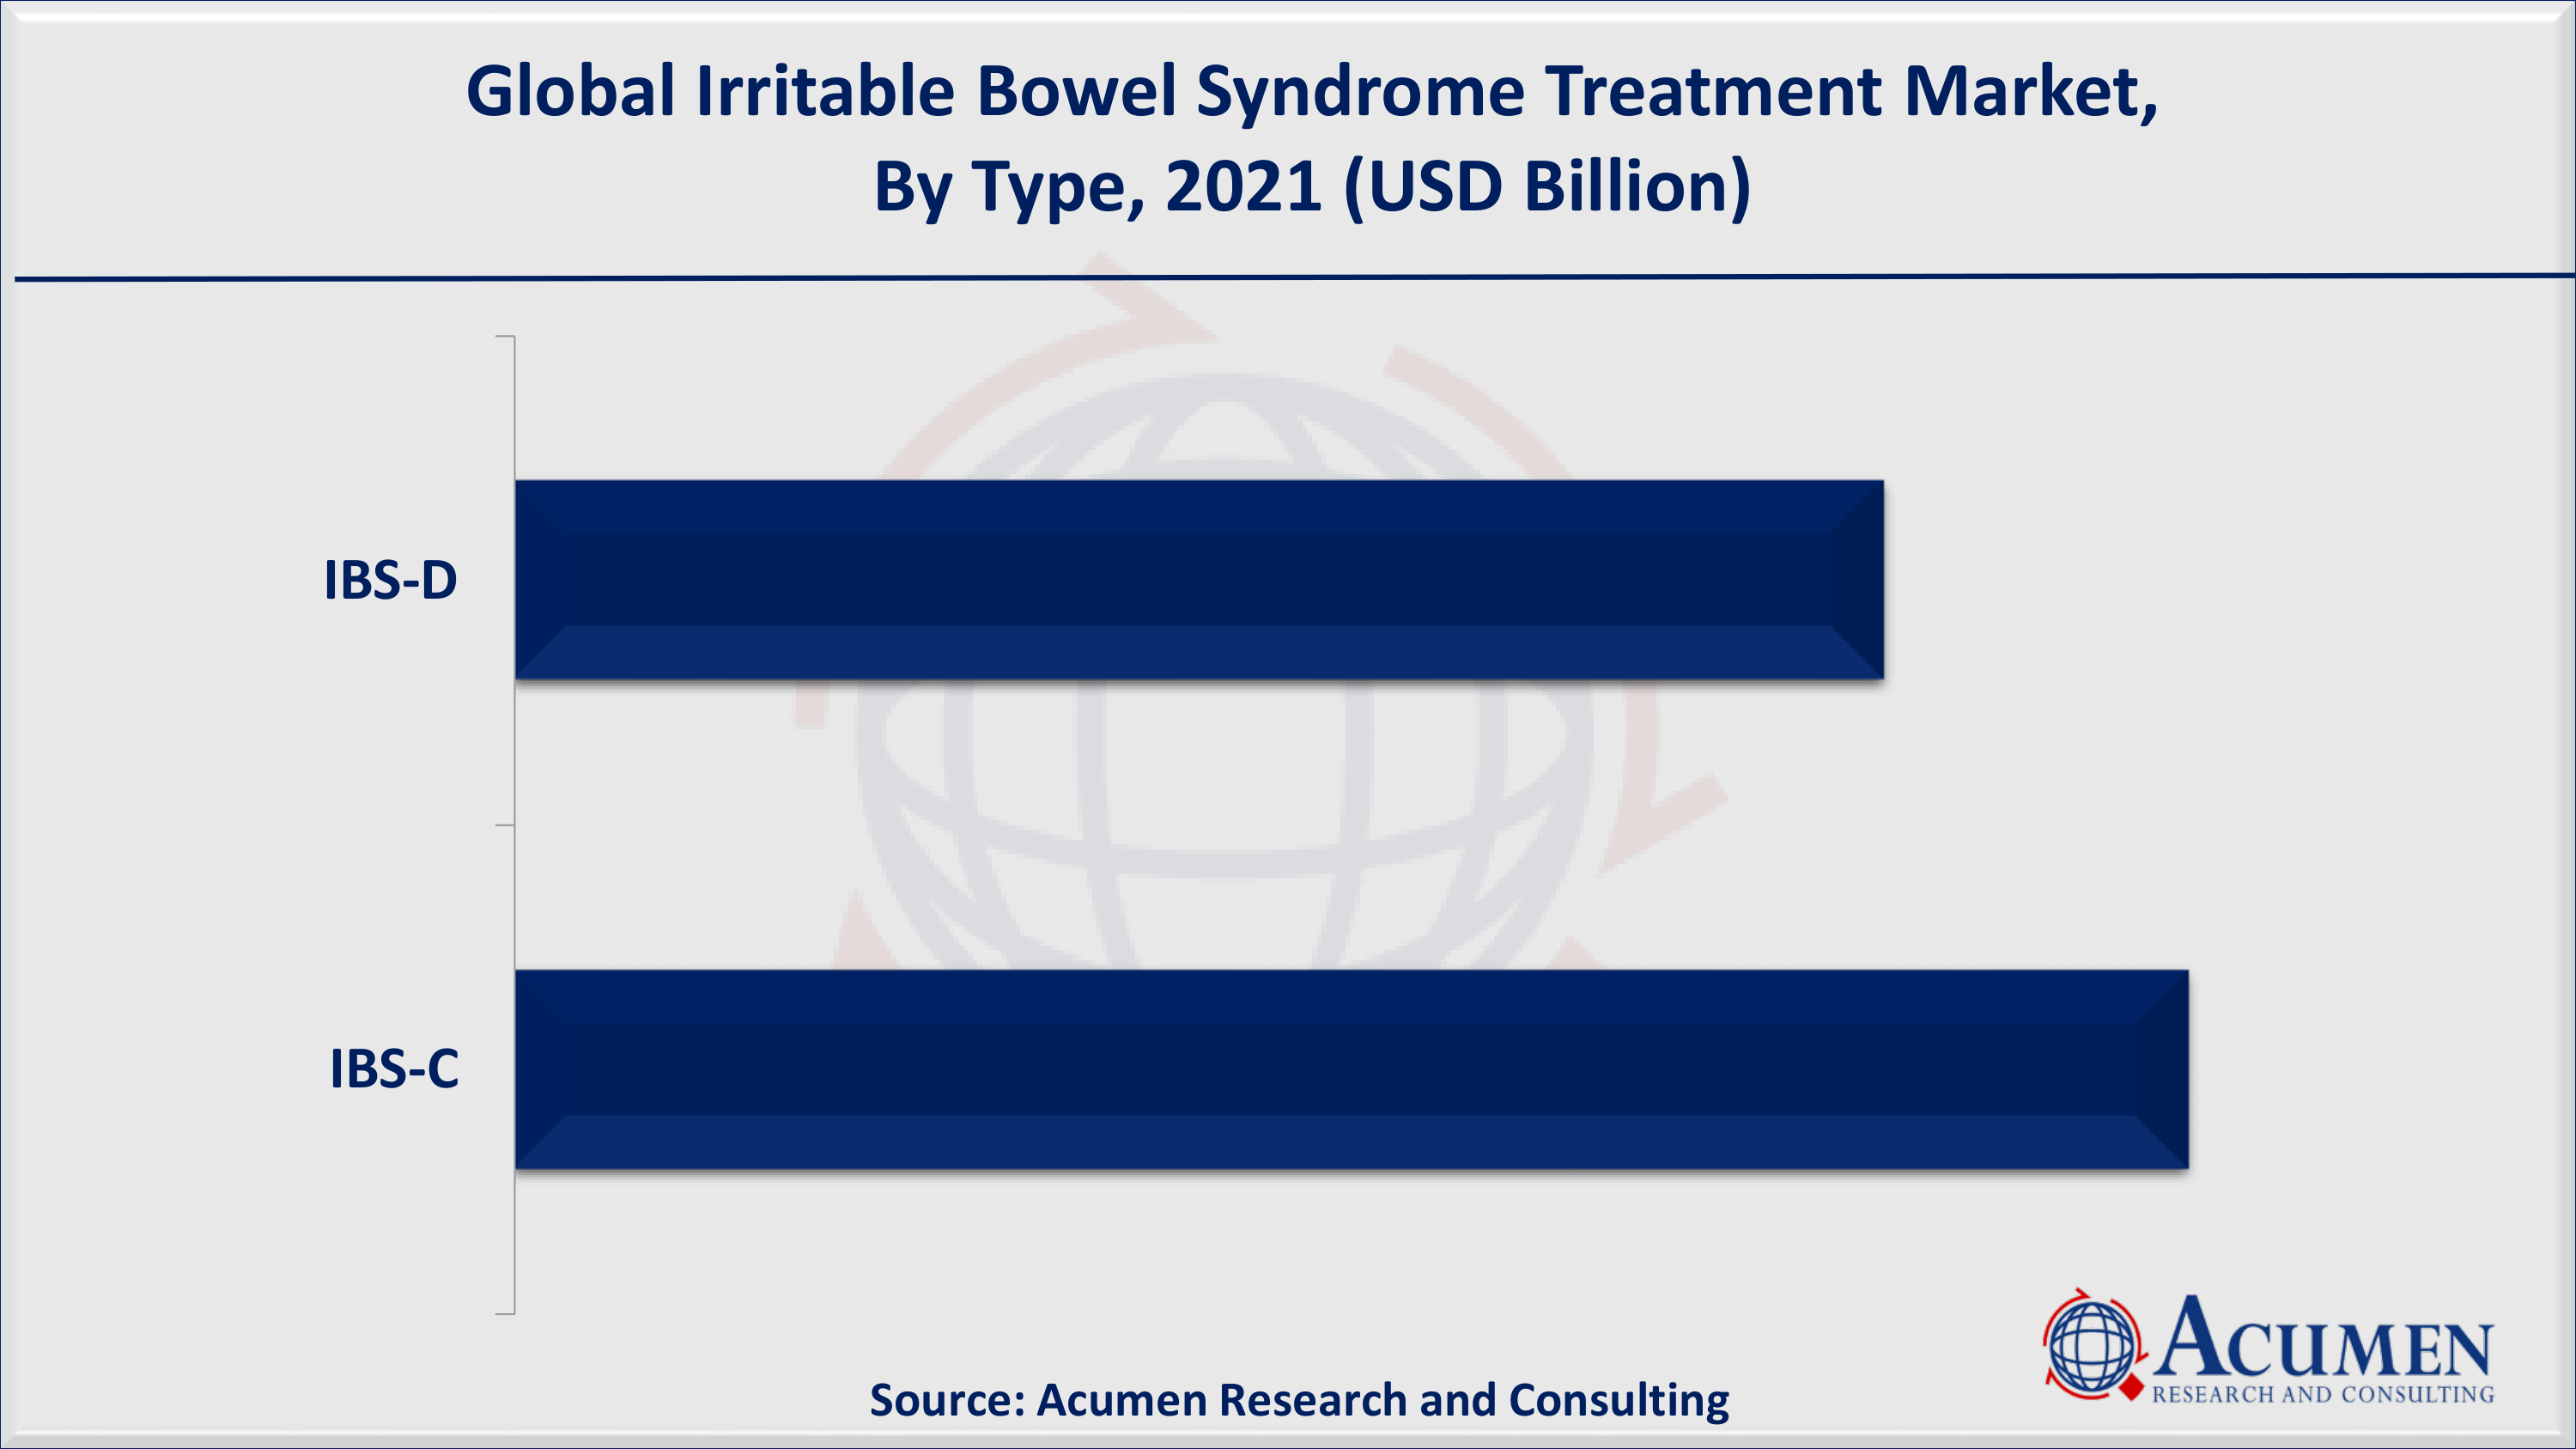 Based on type, IBS-D accounted for over 55% of the overall market share in 2021